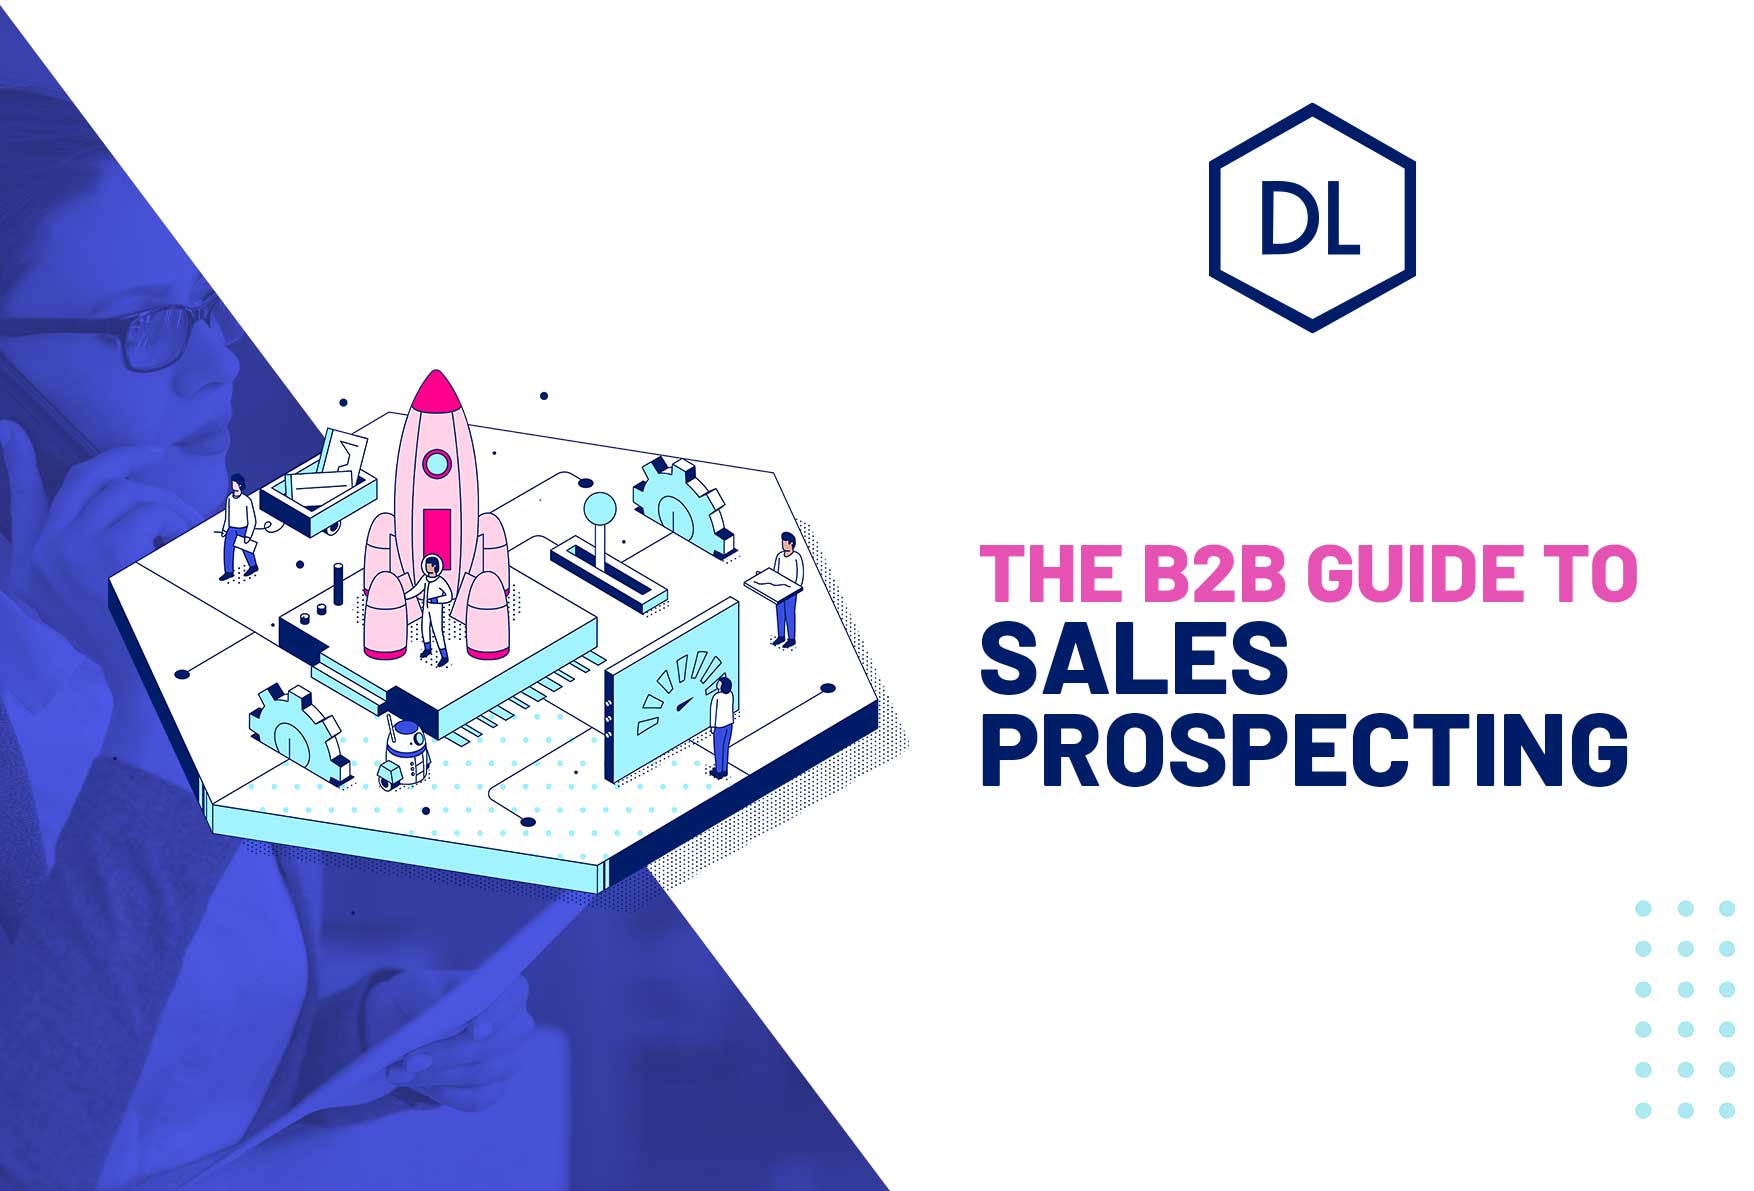 The B2B Guide to Sales Prospecting